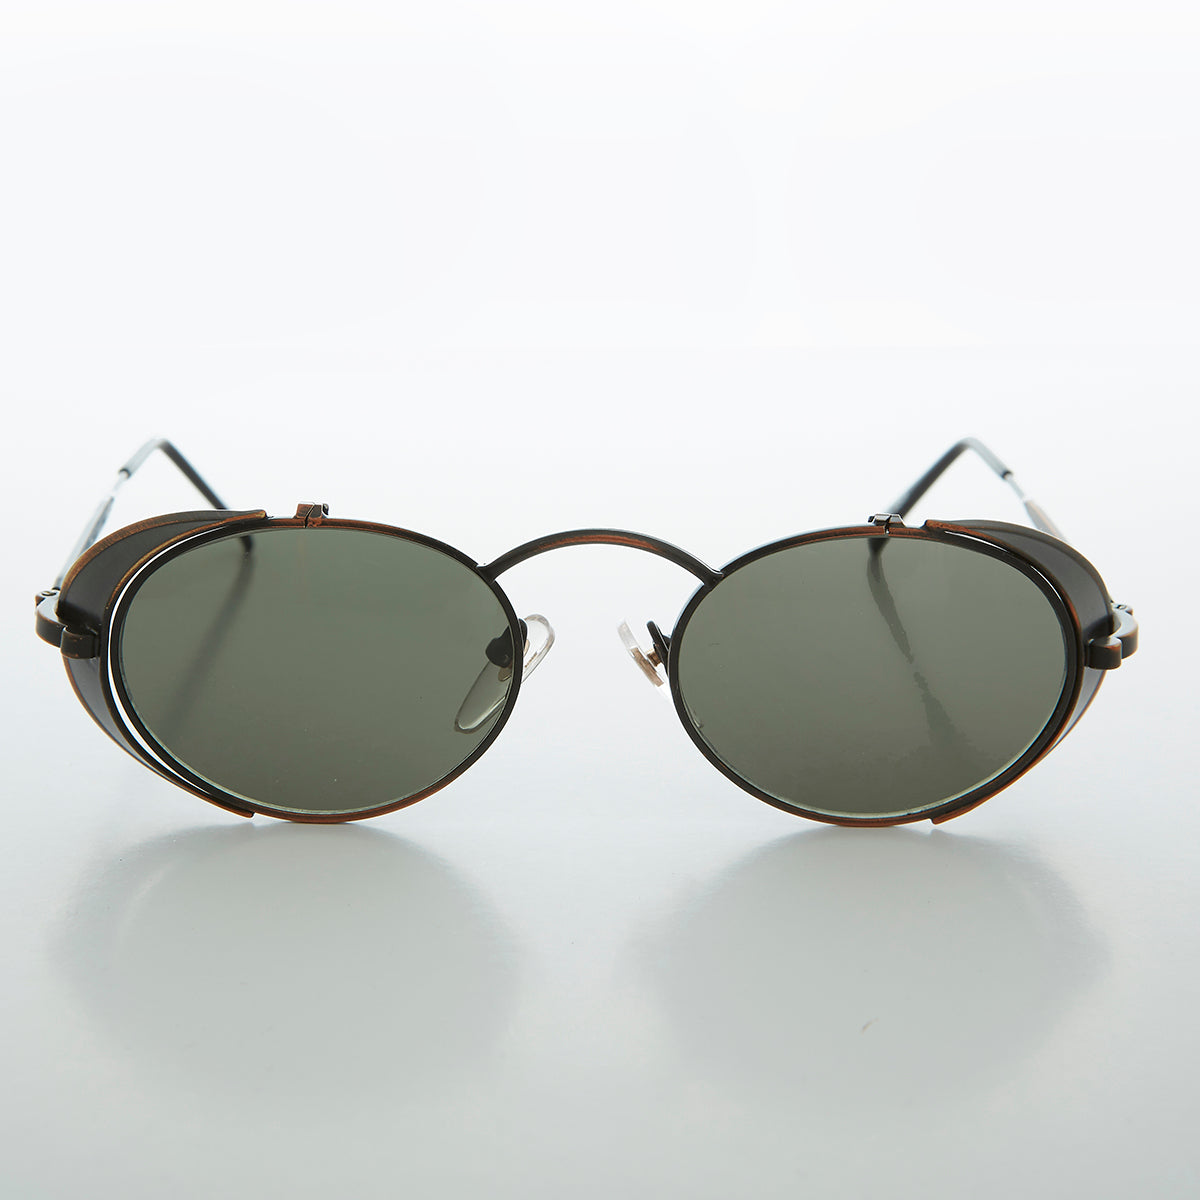 Steampunk Goggle Sunglass with Side Shields Vintage - Orson